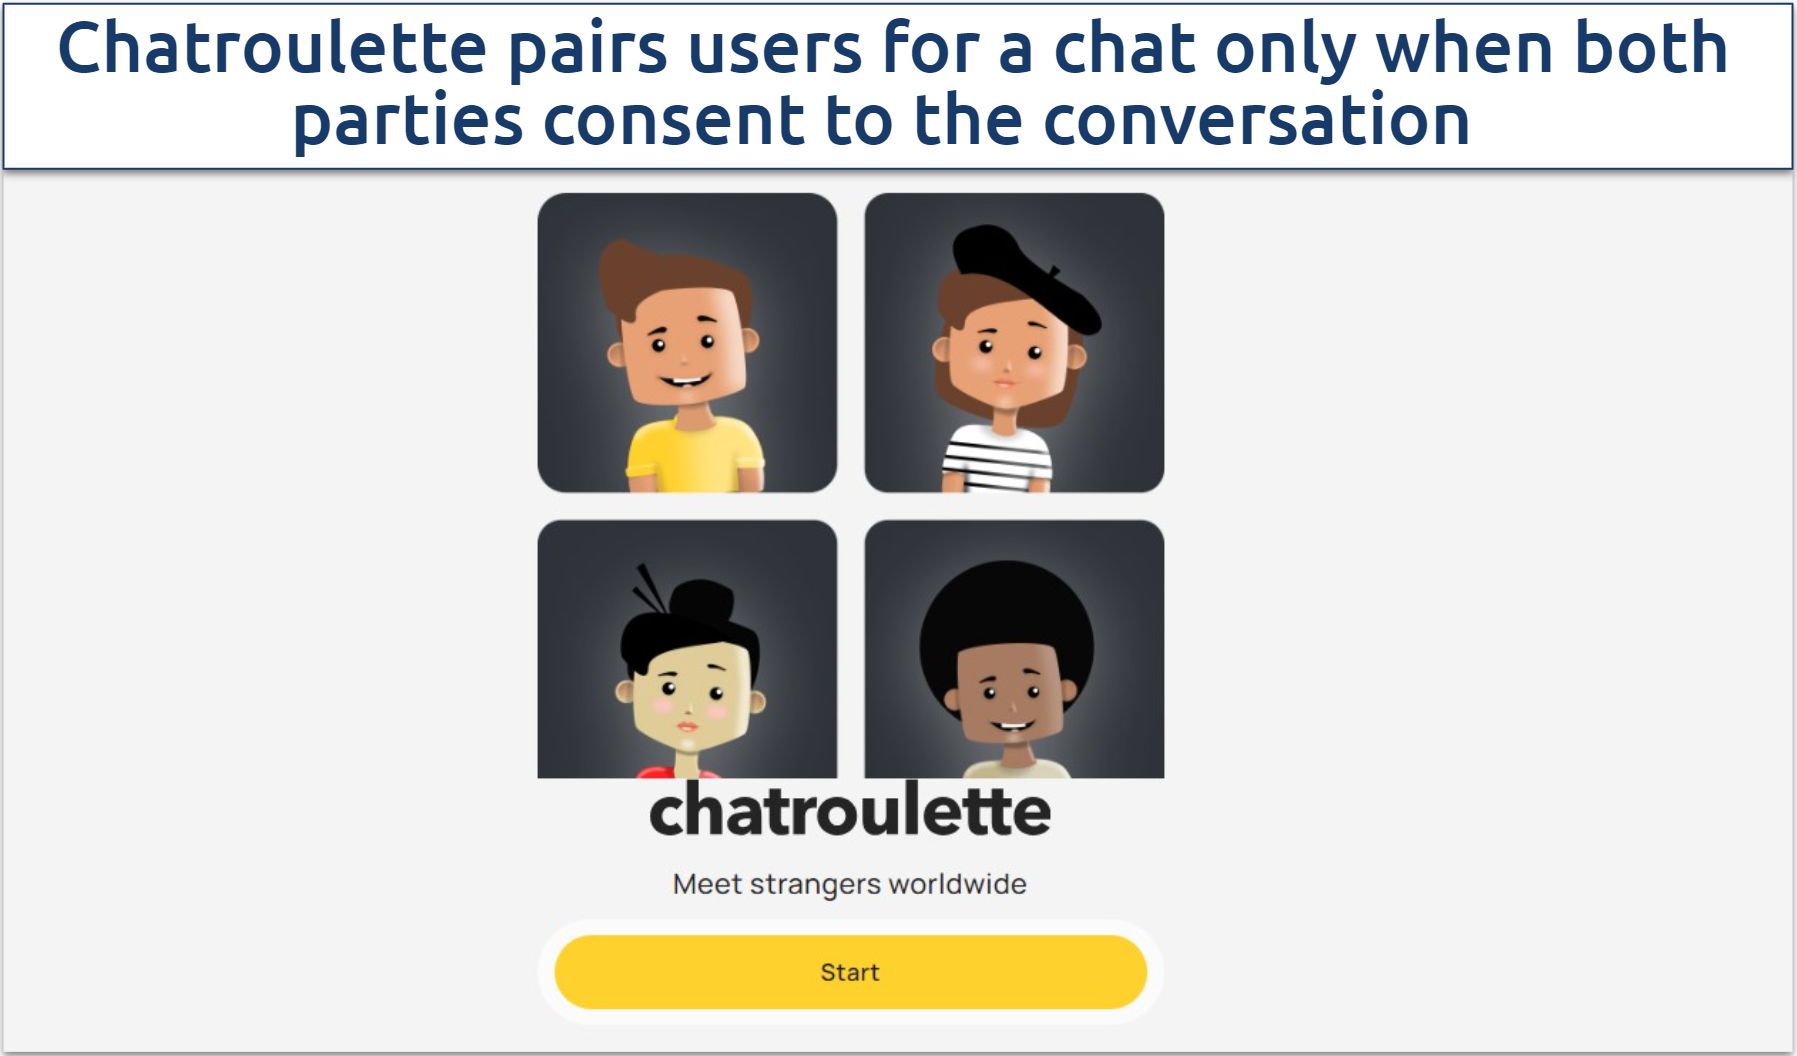 A screenshot of the Chatroulette homepage